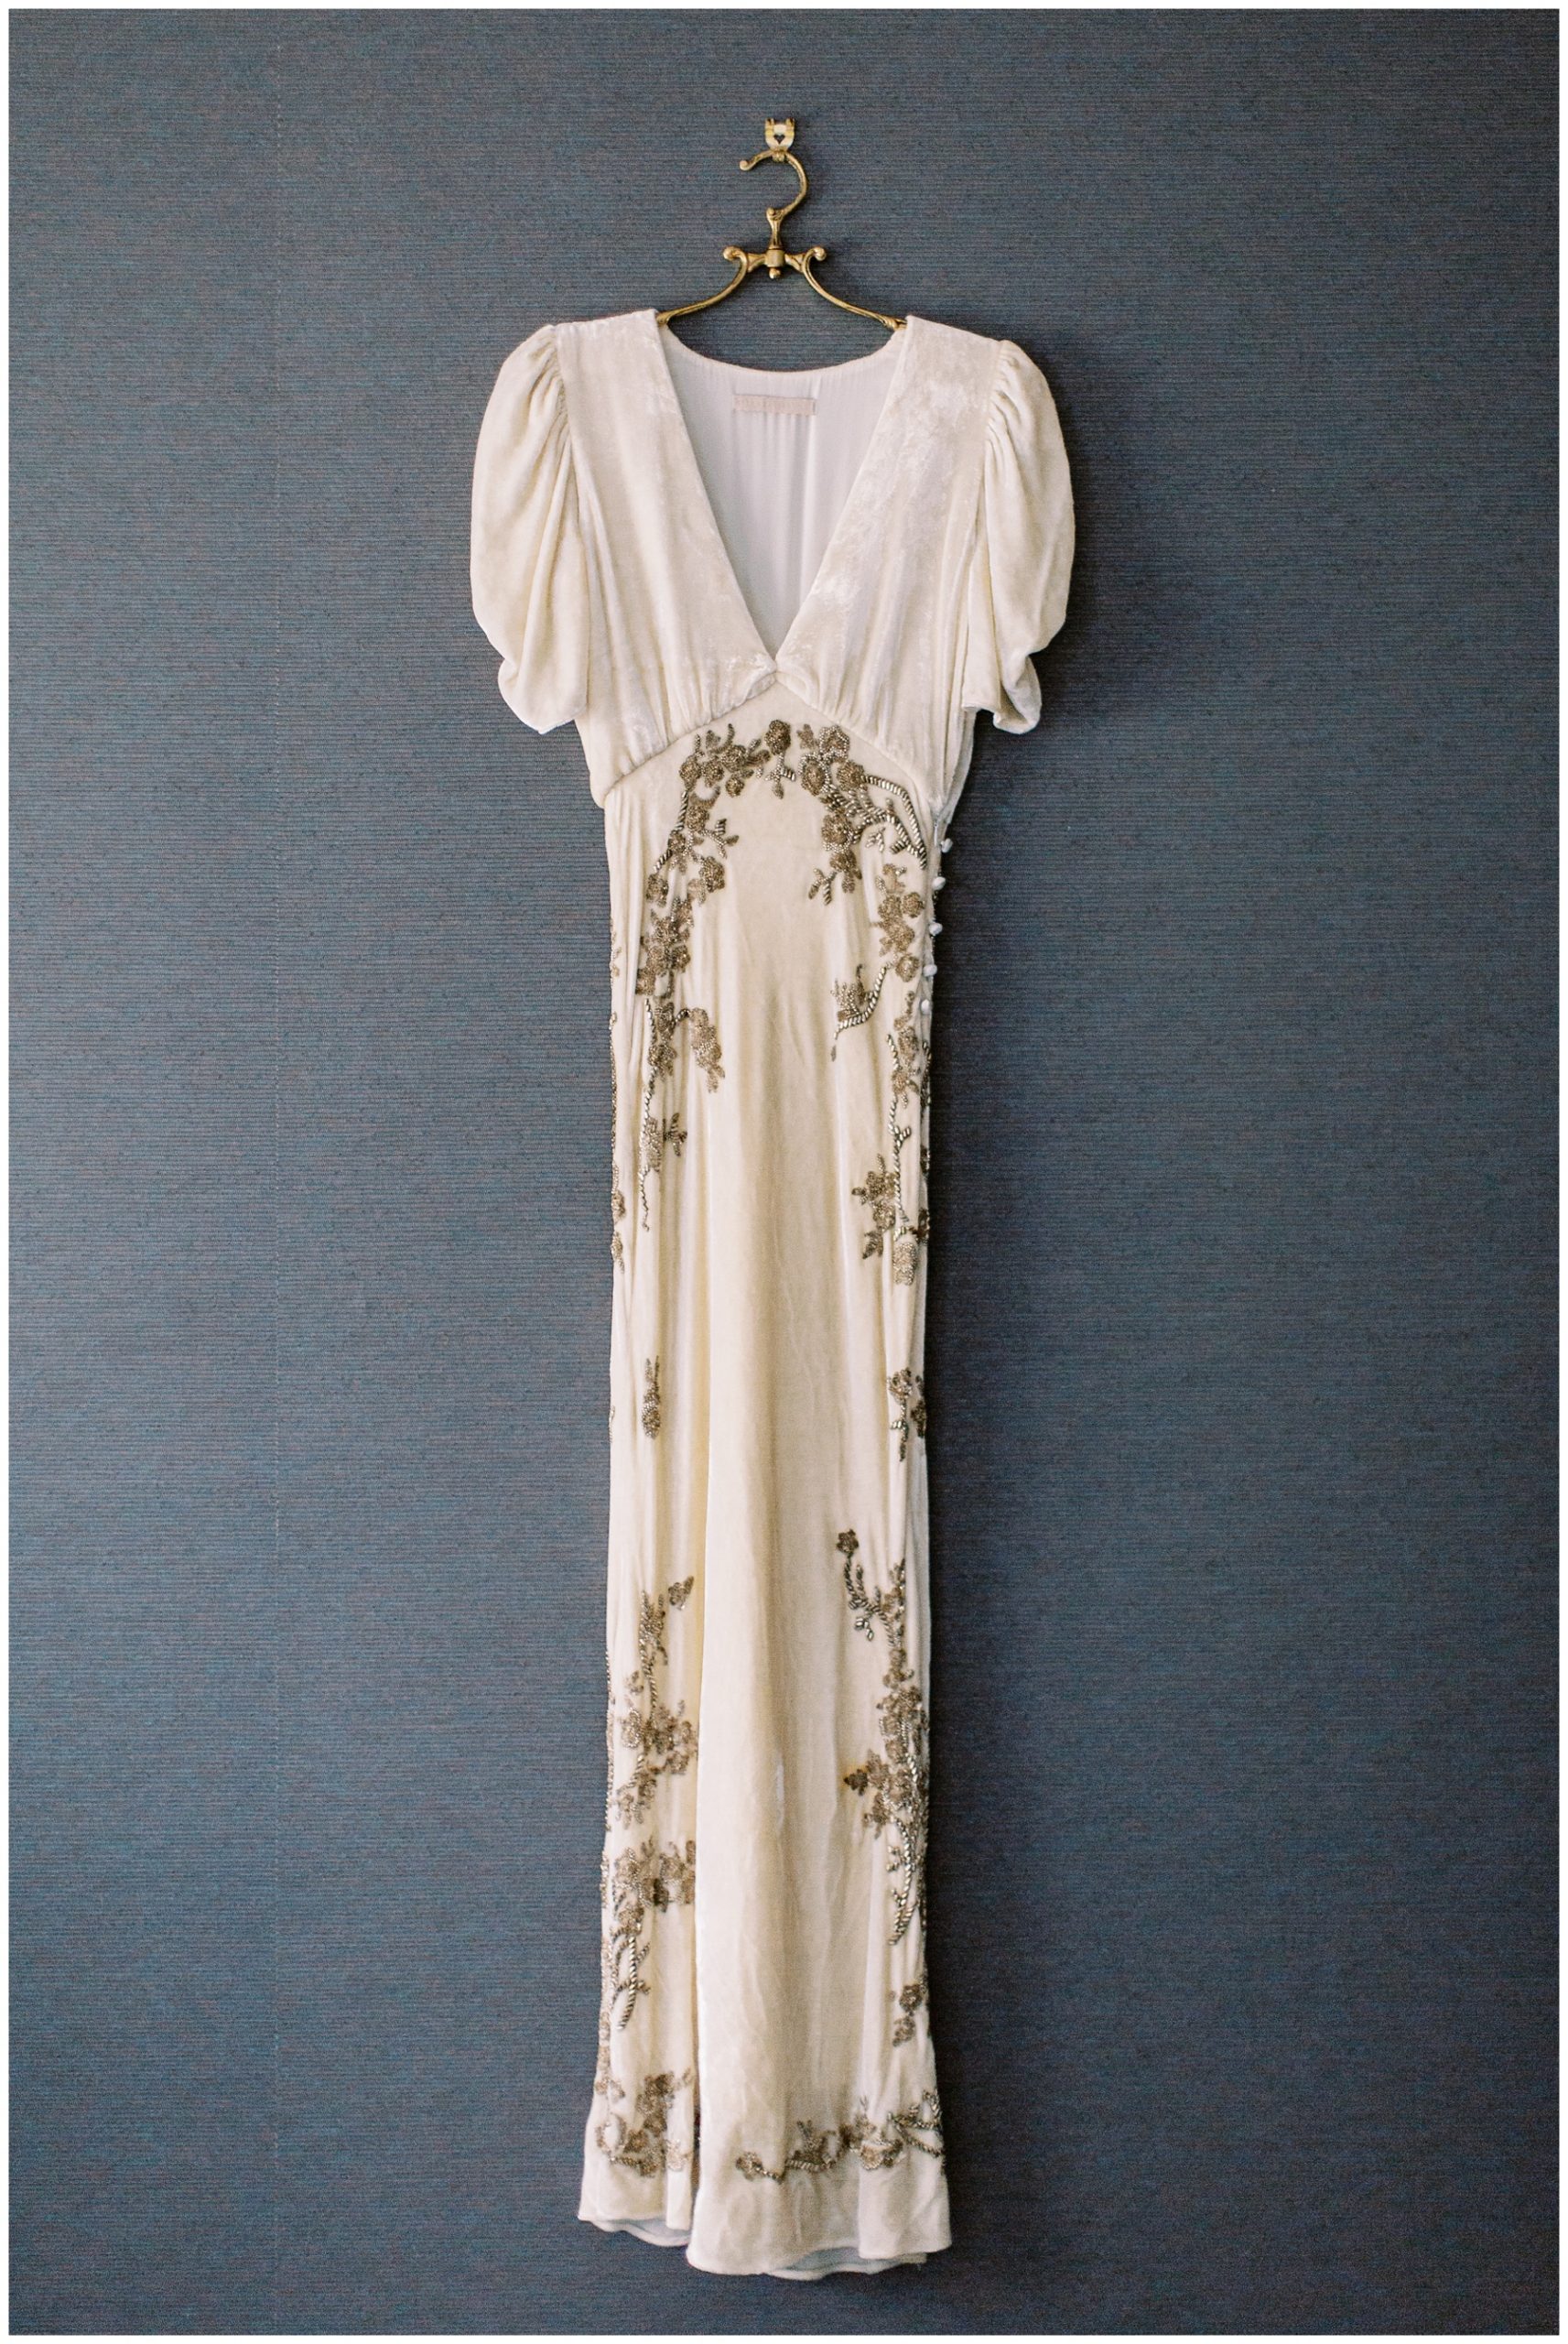 vintage ivory and gold wedding gown hanging on wall